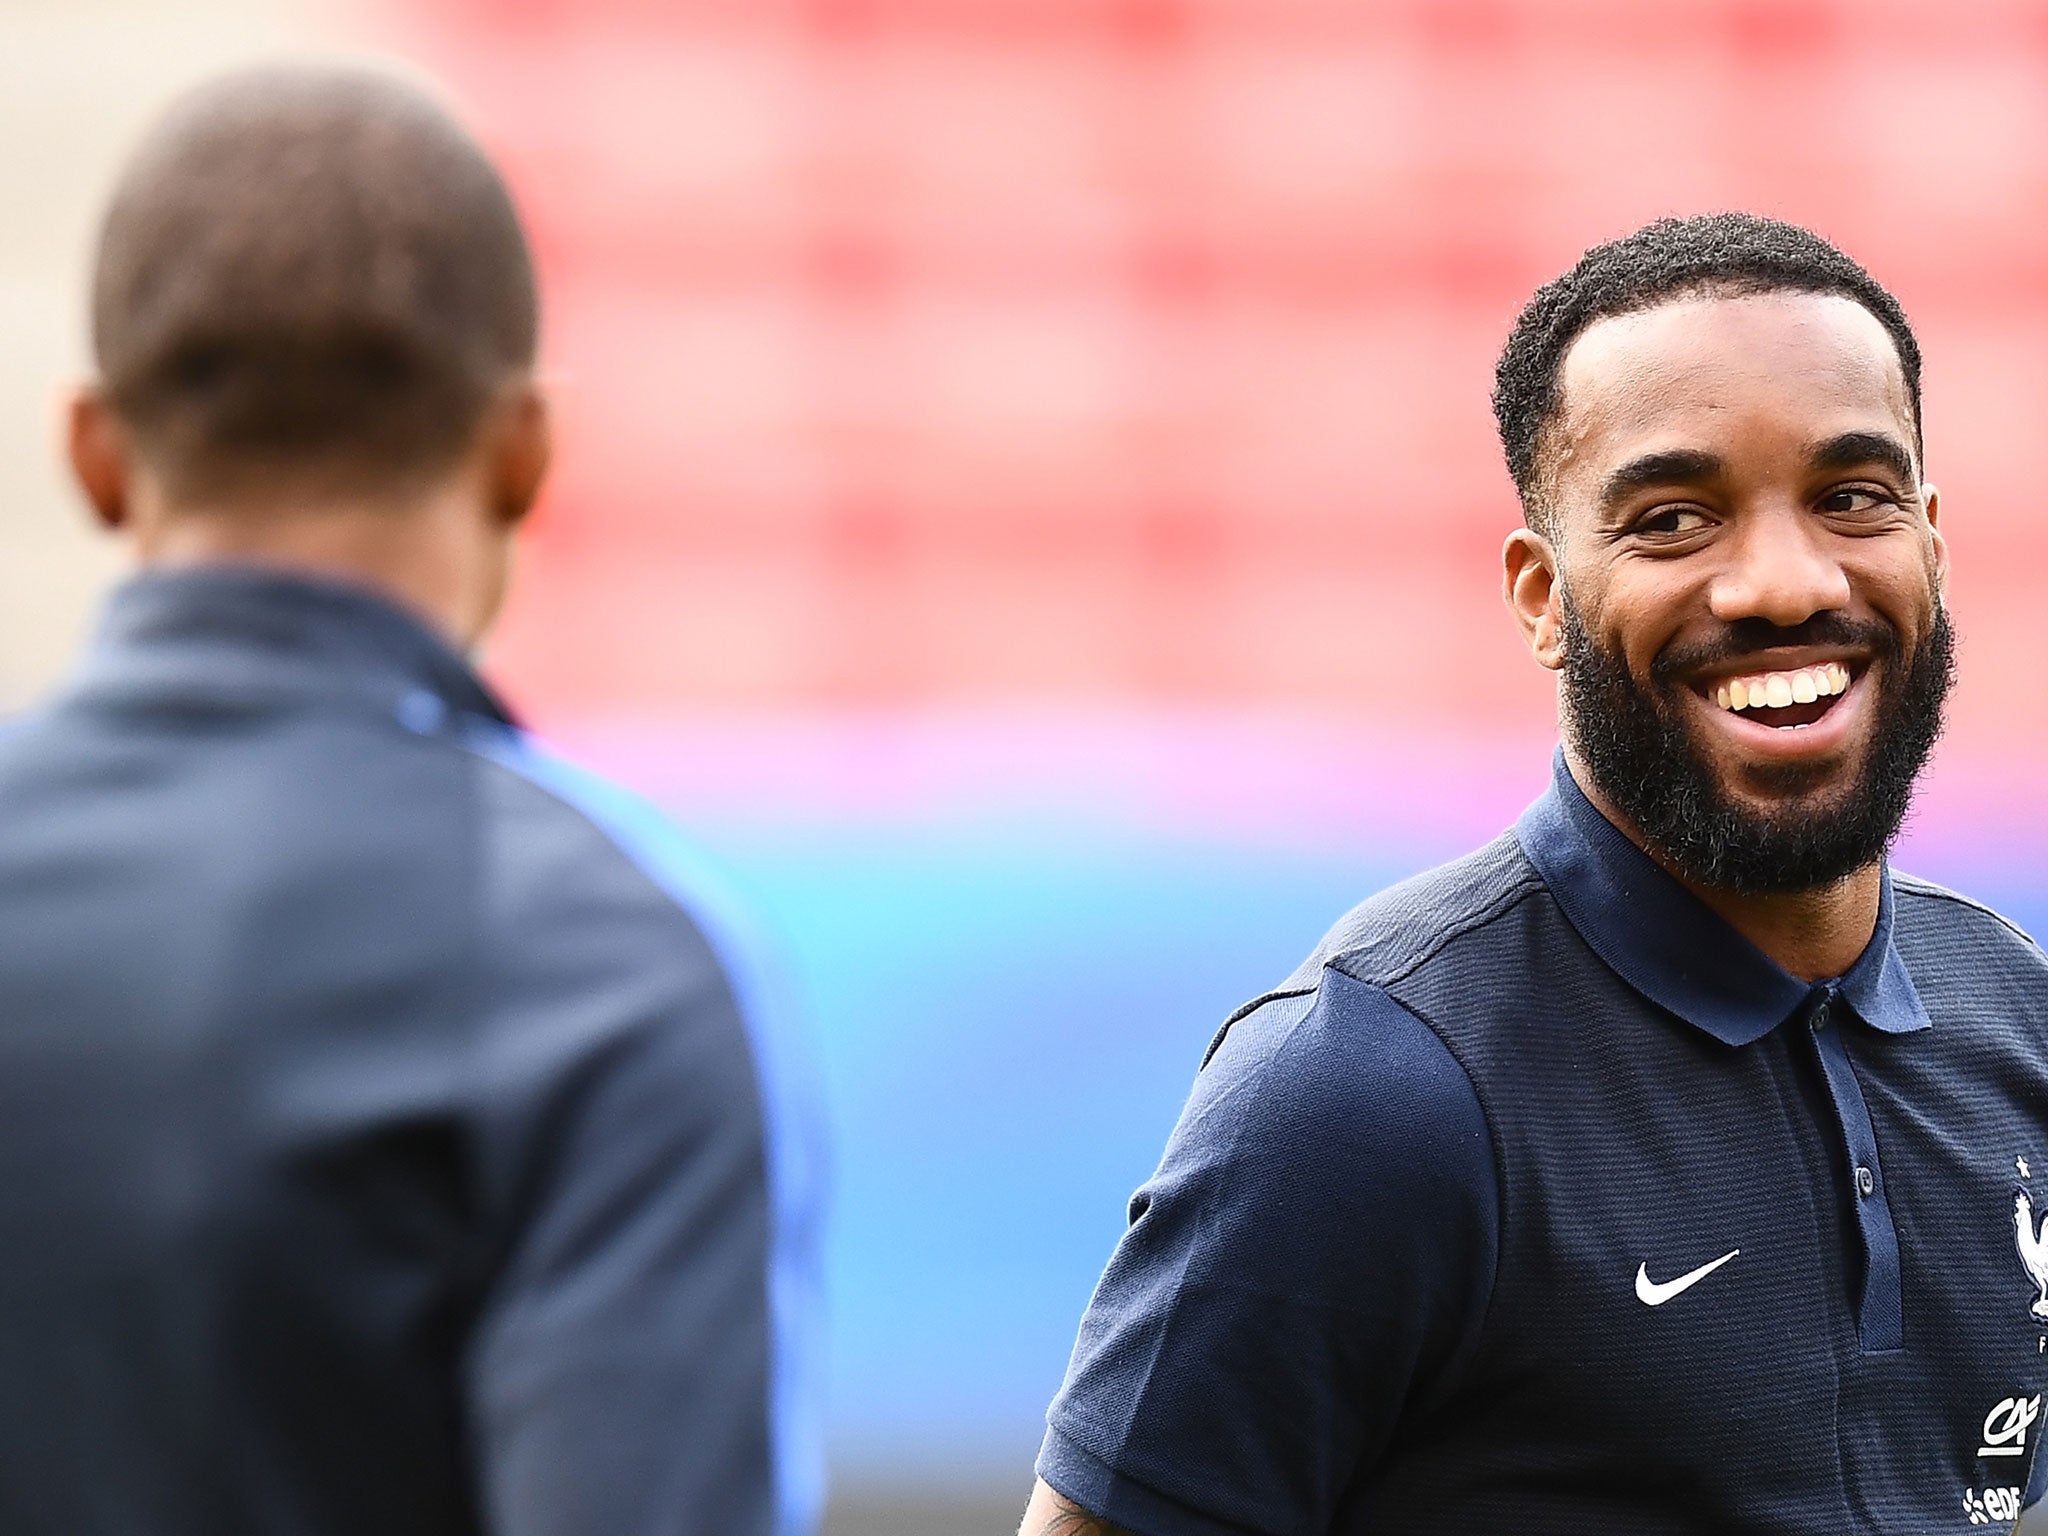 Alexandre Lacazette is set to become Arsenal's second signing of the summer